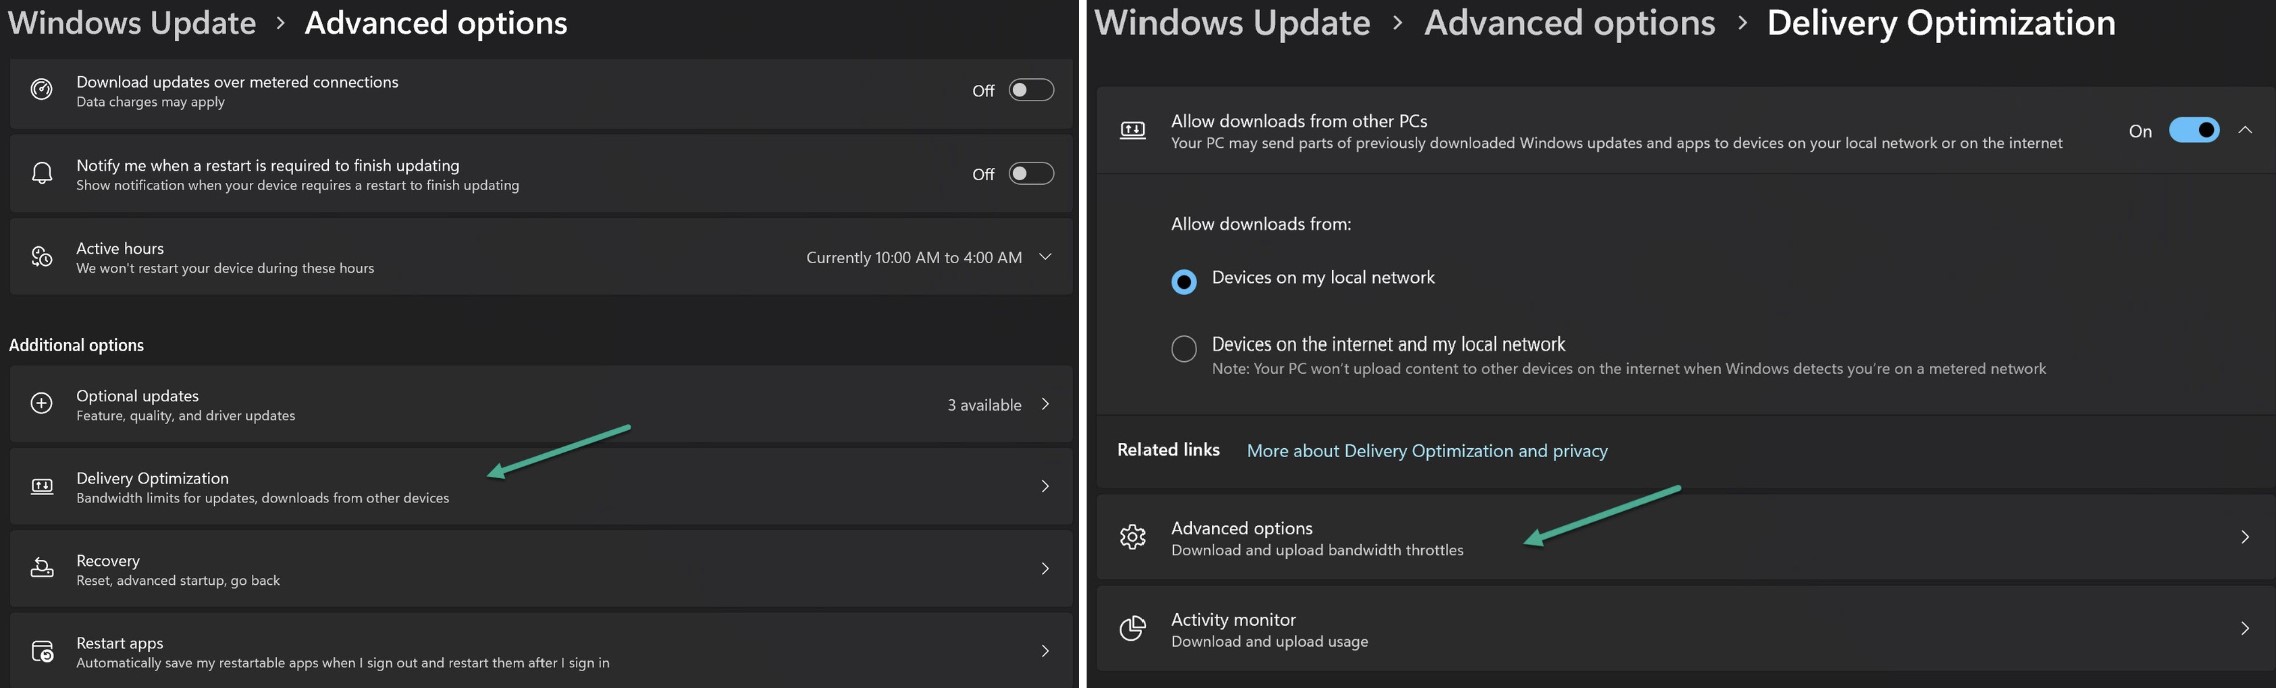 Microsoft Store Slow Download? 10 Fixes That Work (Reset, Increase Bandwidth + More) 3